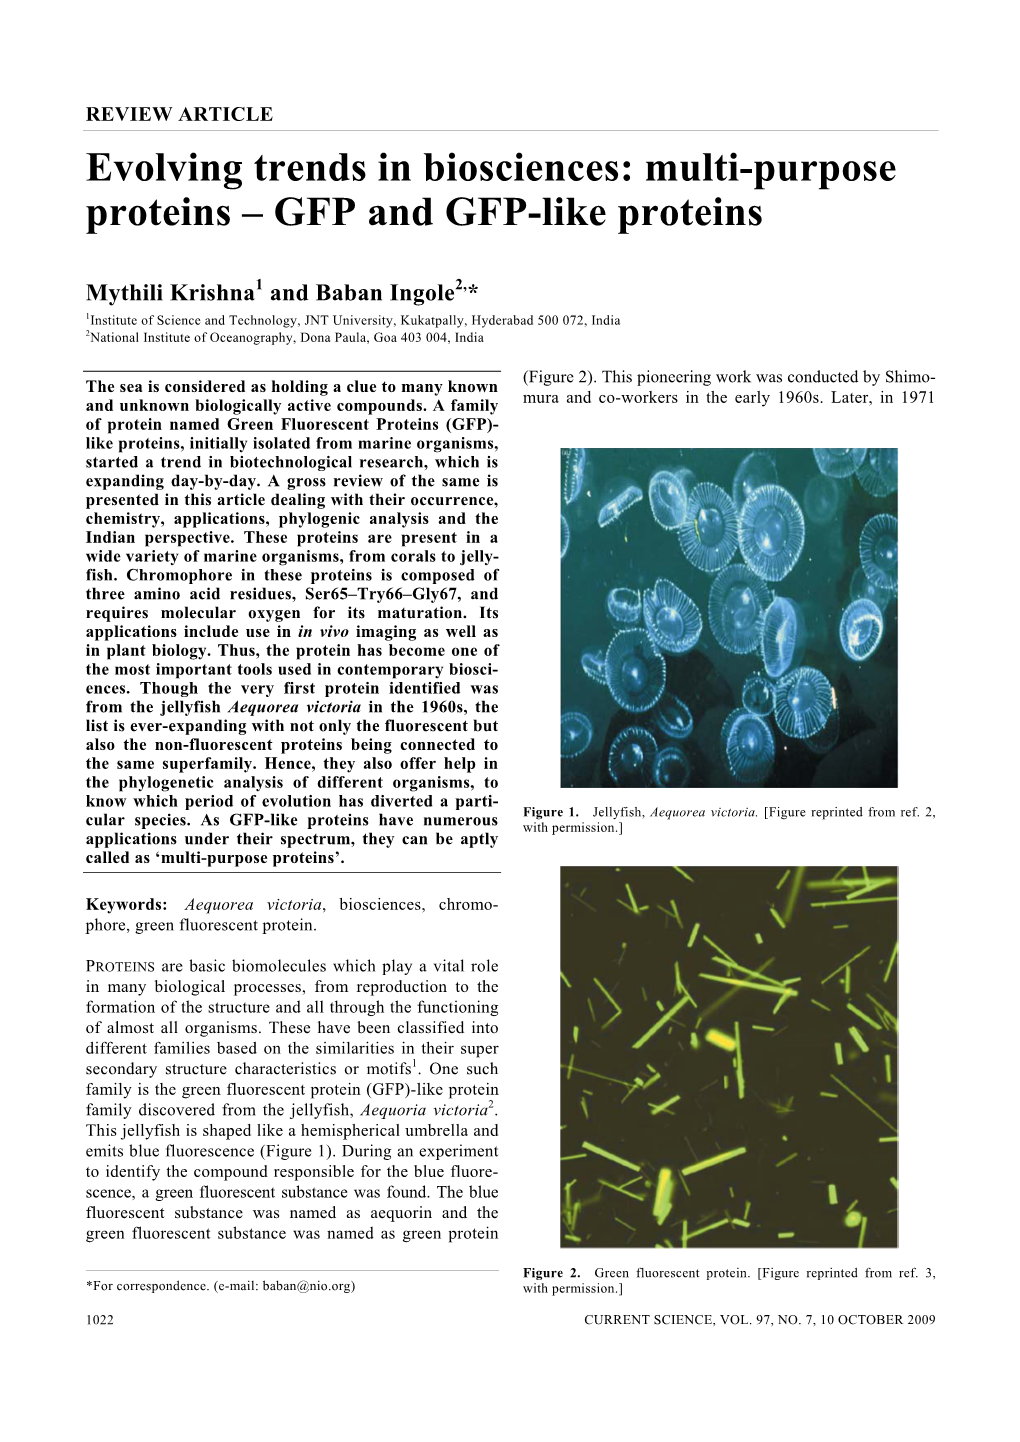 GFP and GFP-Like Proteins